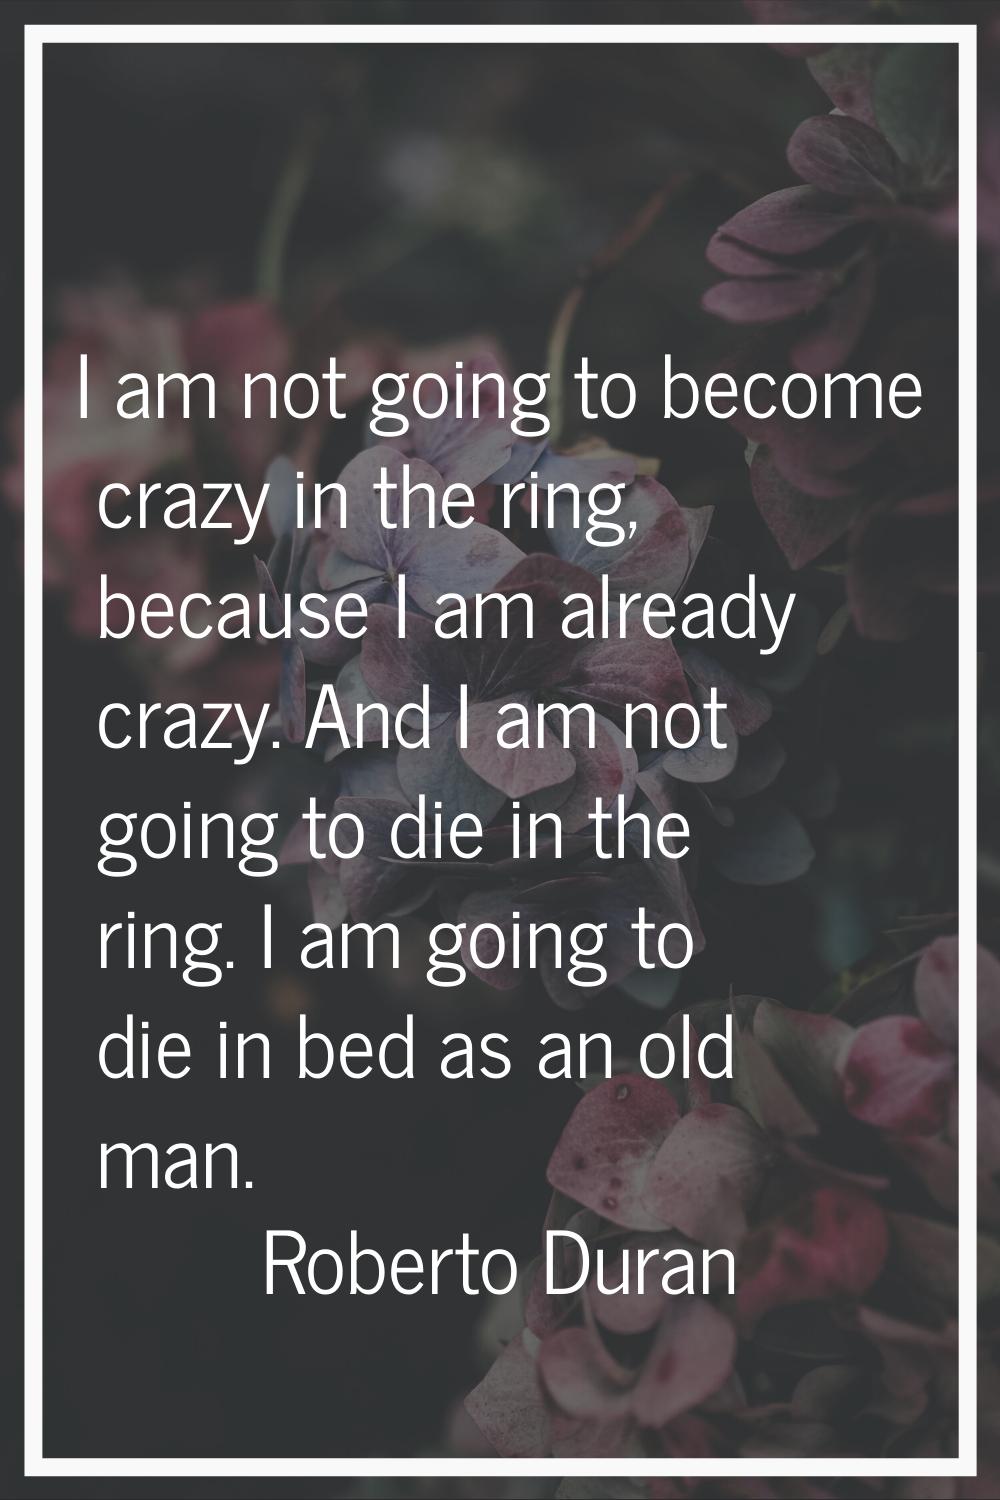 I am not going to become crazy in the ring, because I am already crazy. And I am not going to die i